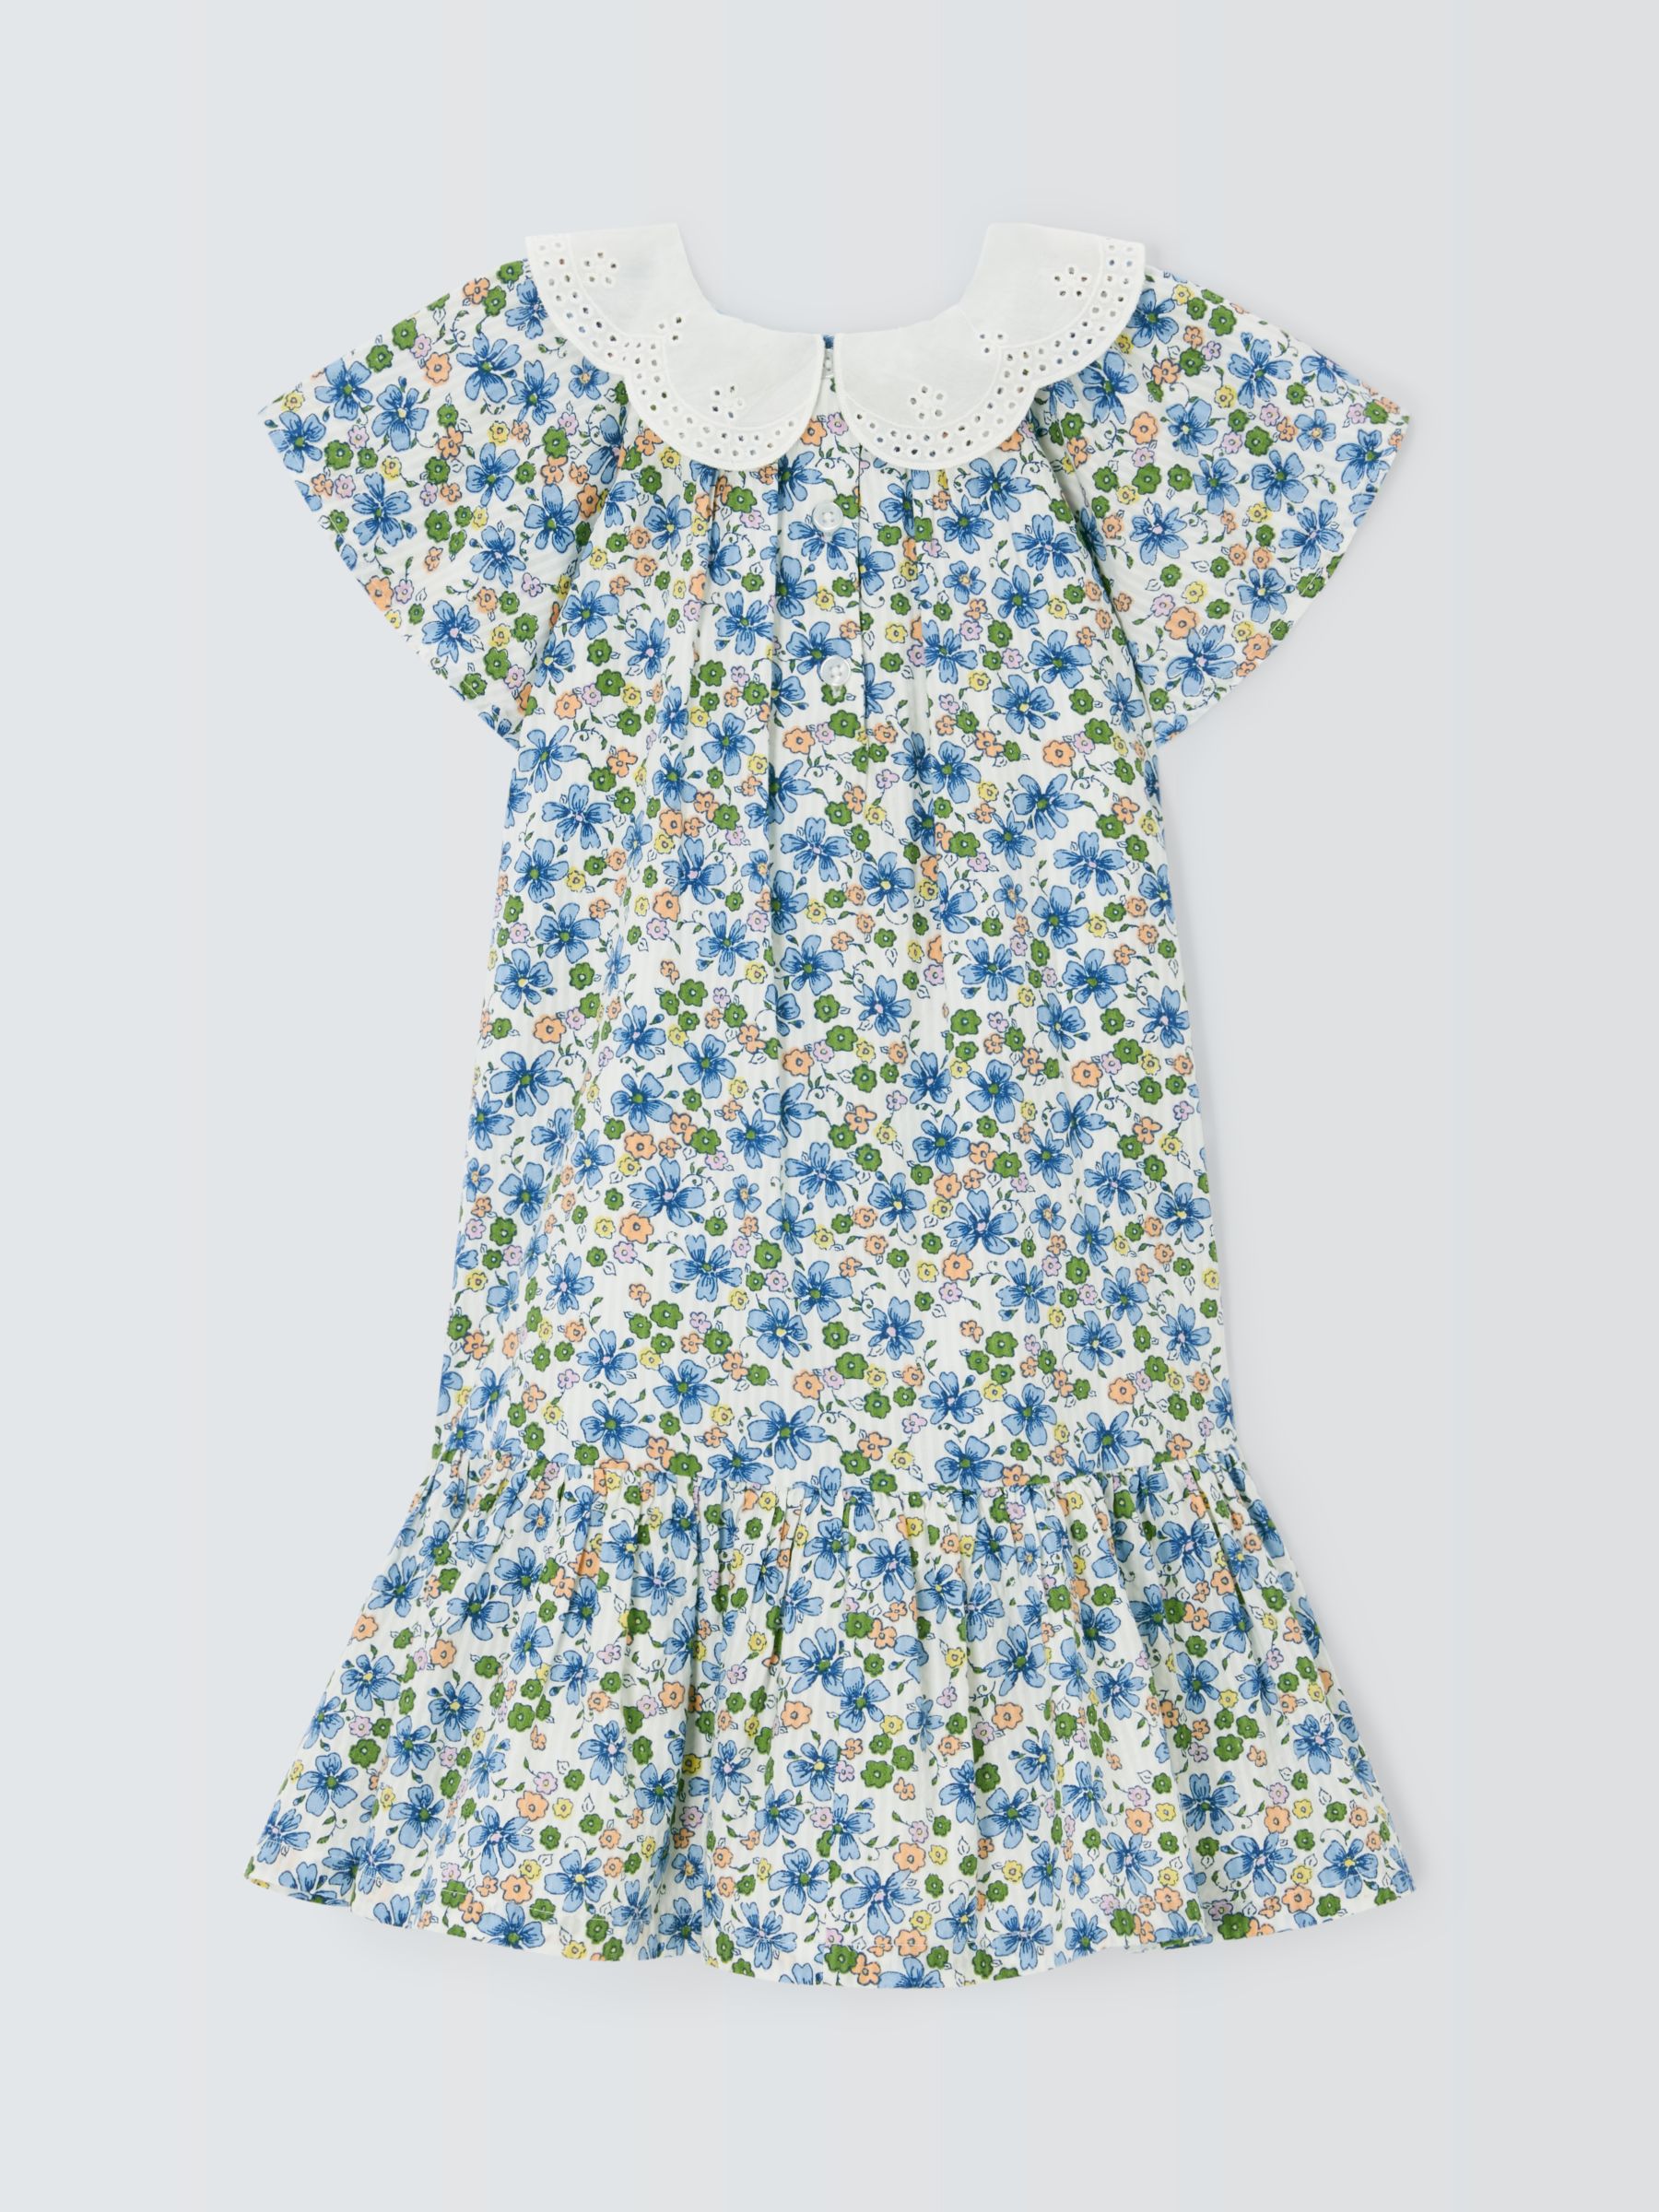 John Lewis Kids' Floral Broderie Anglaise Collar Dress, Multi, 4 years